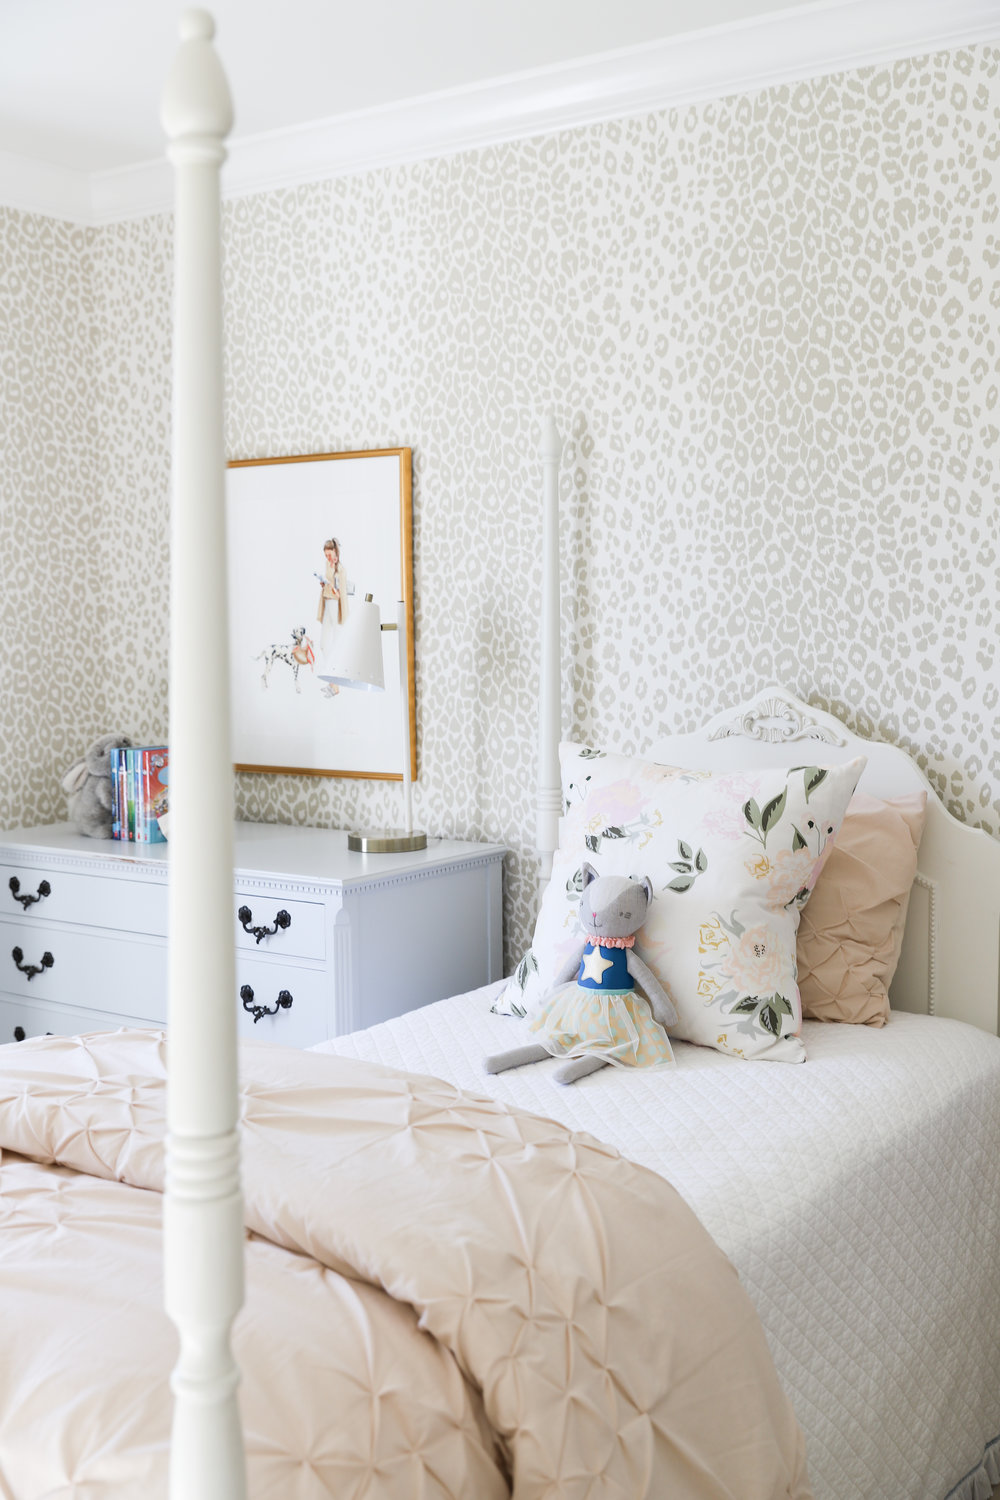 Tween Girls Bedroom Design by Laura Design Co., Photo by Emily Kennedy